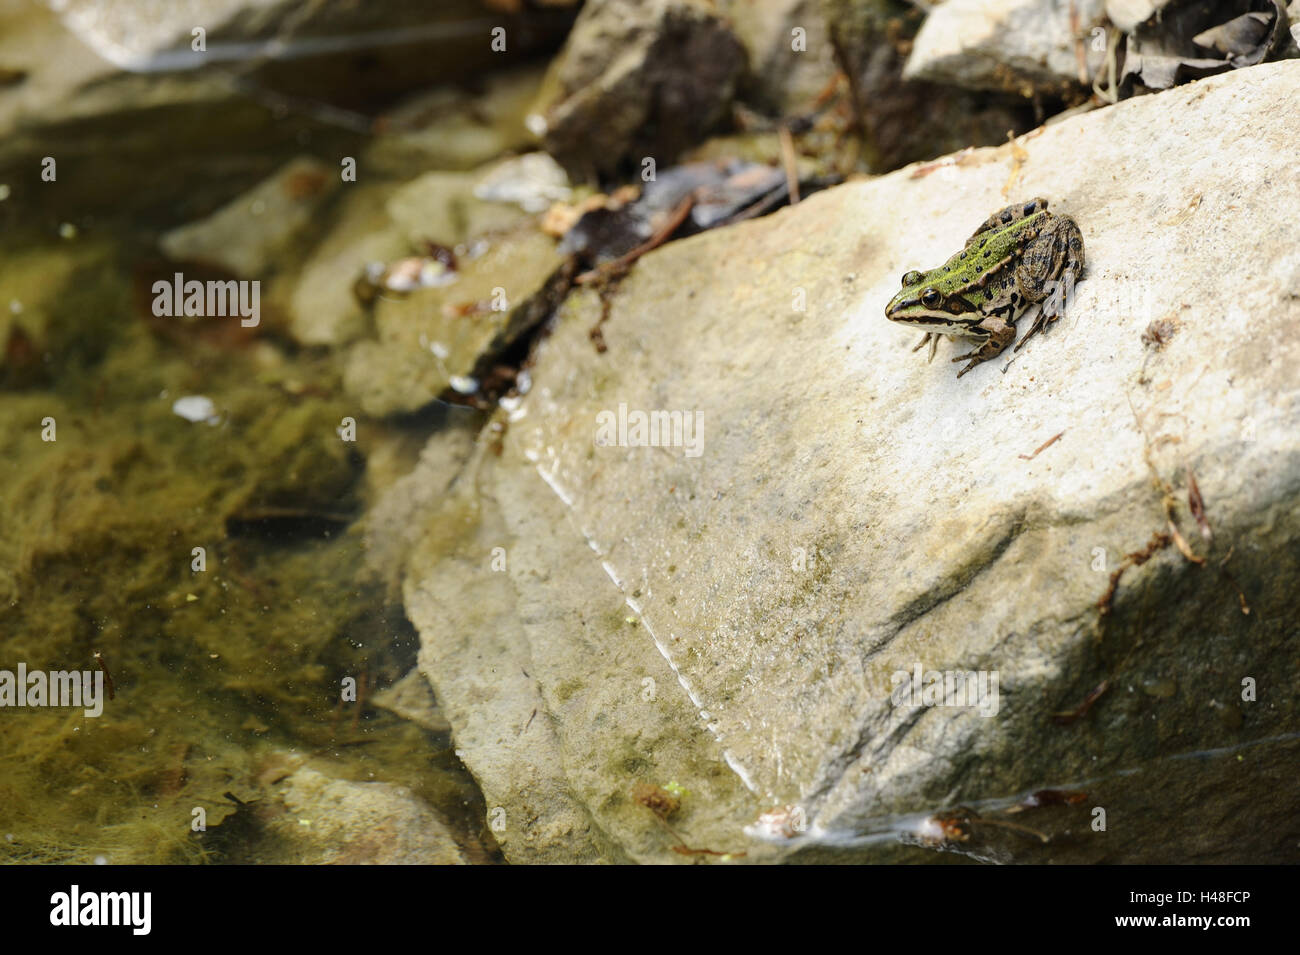 Grass frog, Rana temporaria, stone, shore, water, side view, sitting, Stock Photo